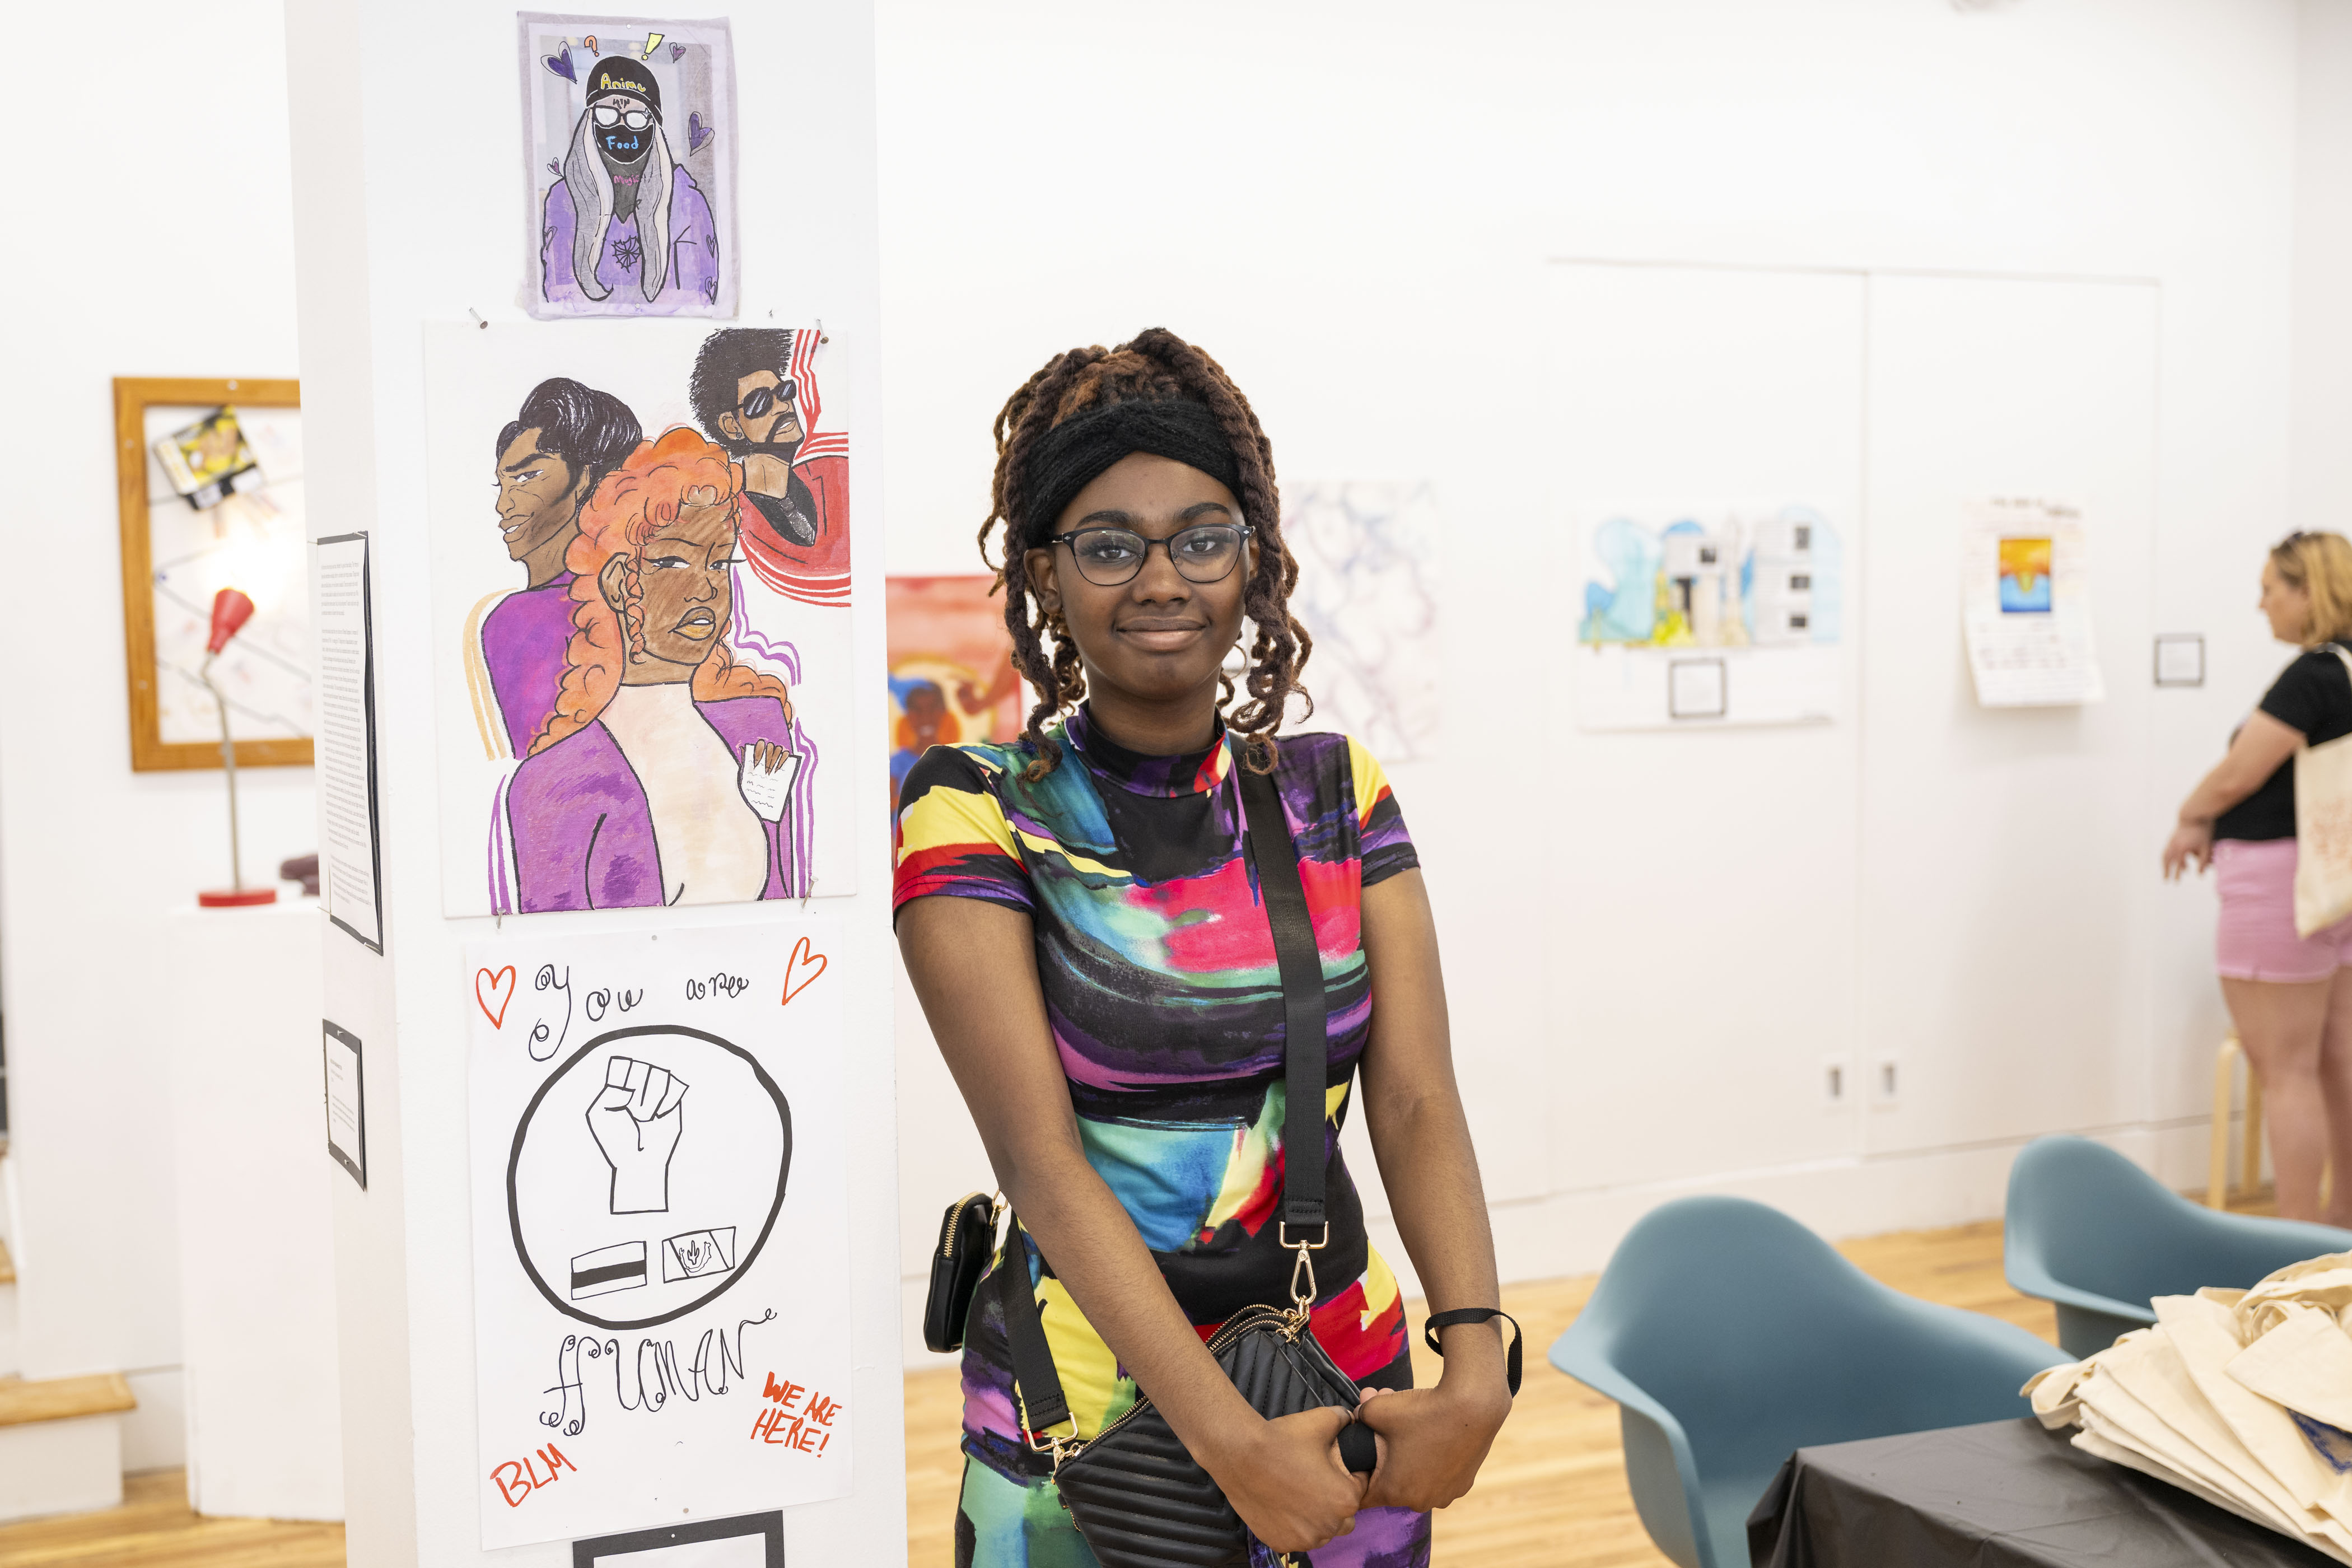 LEAP student, De'Nejah, standing next to a drawing she created and colored with markers